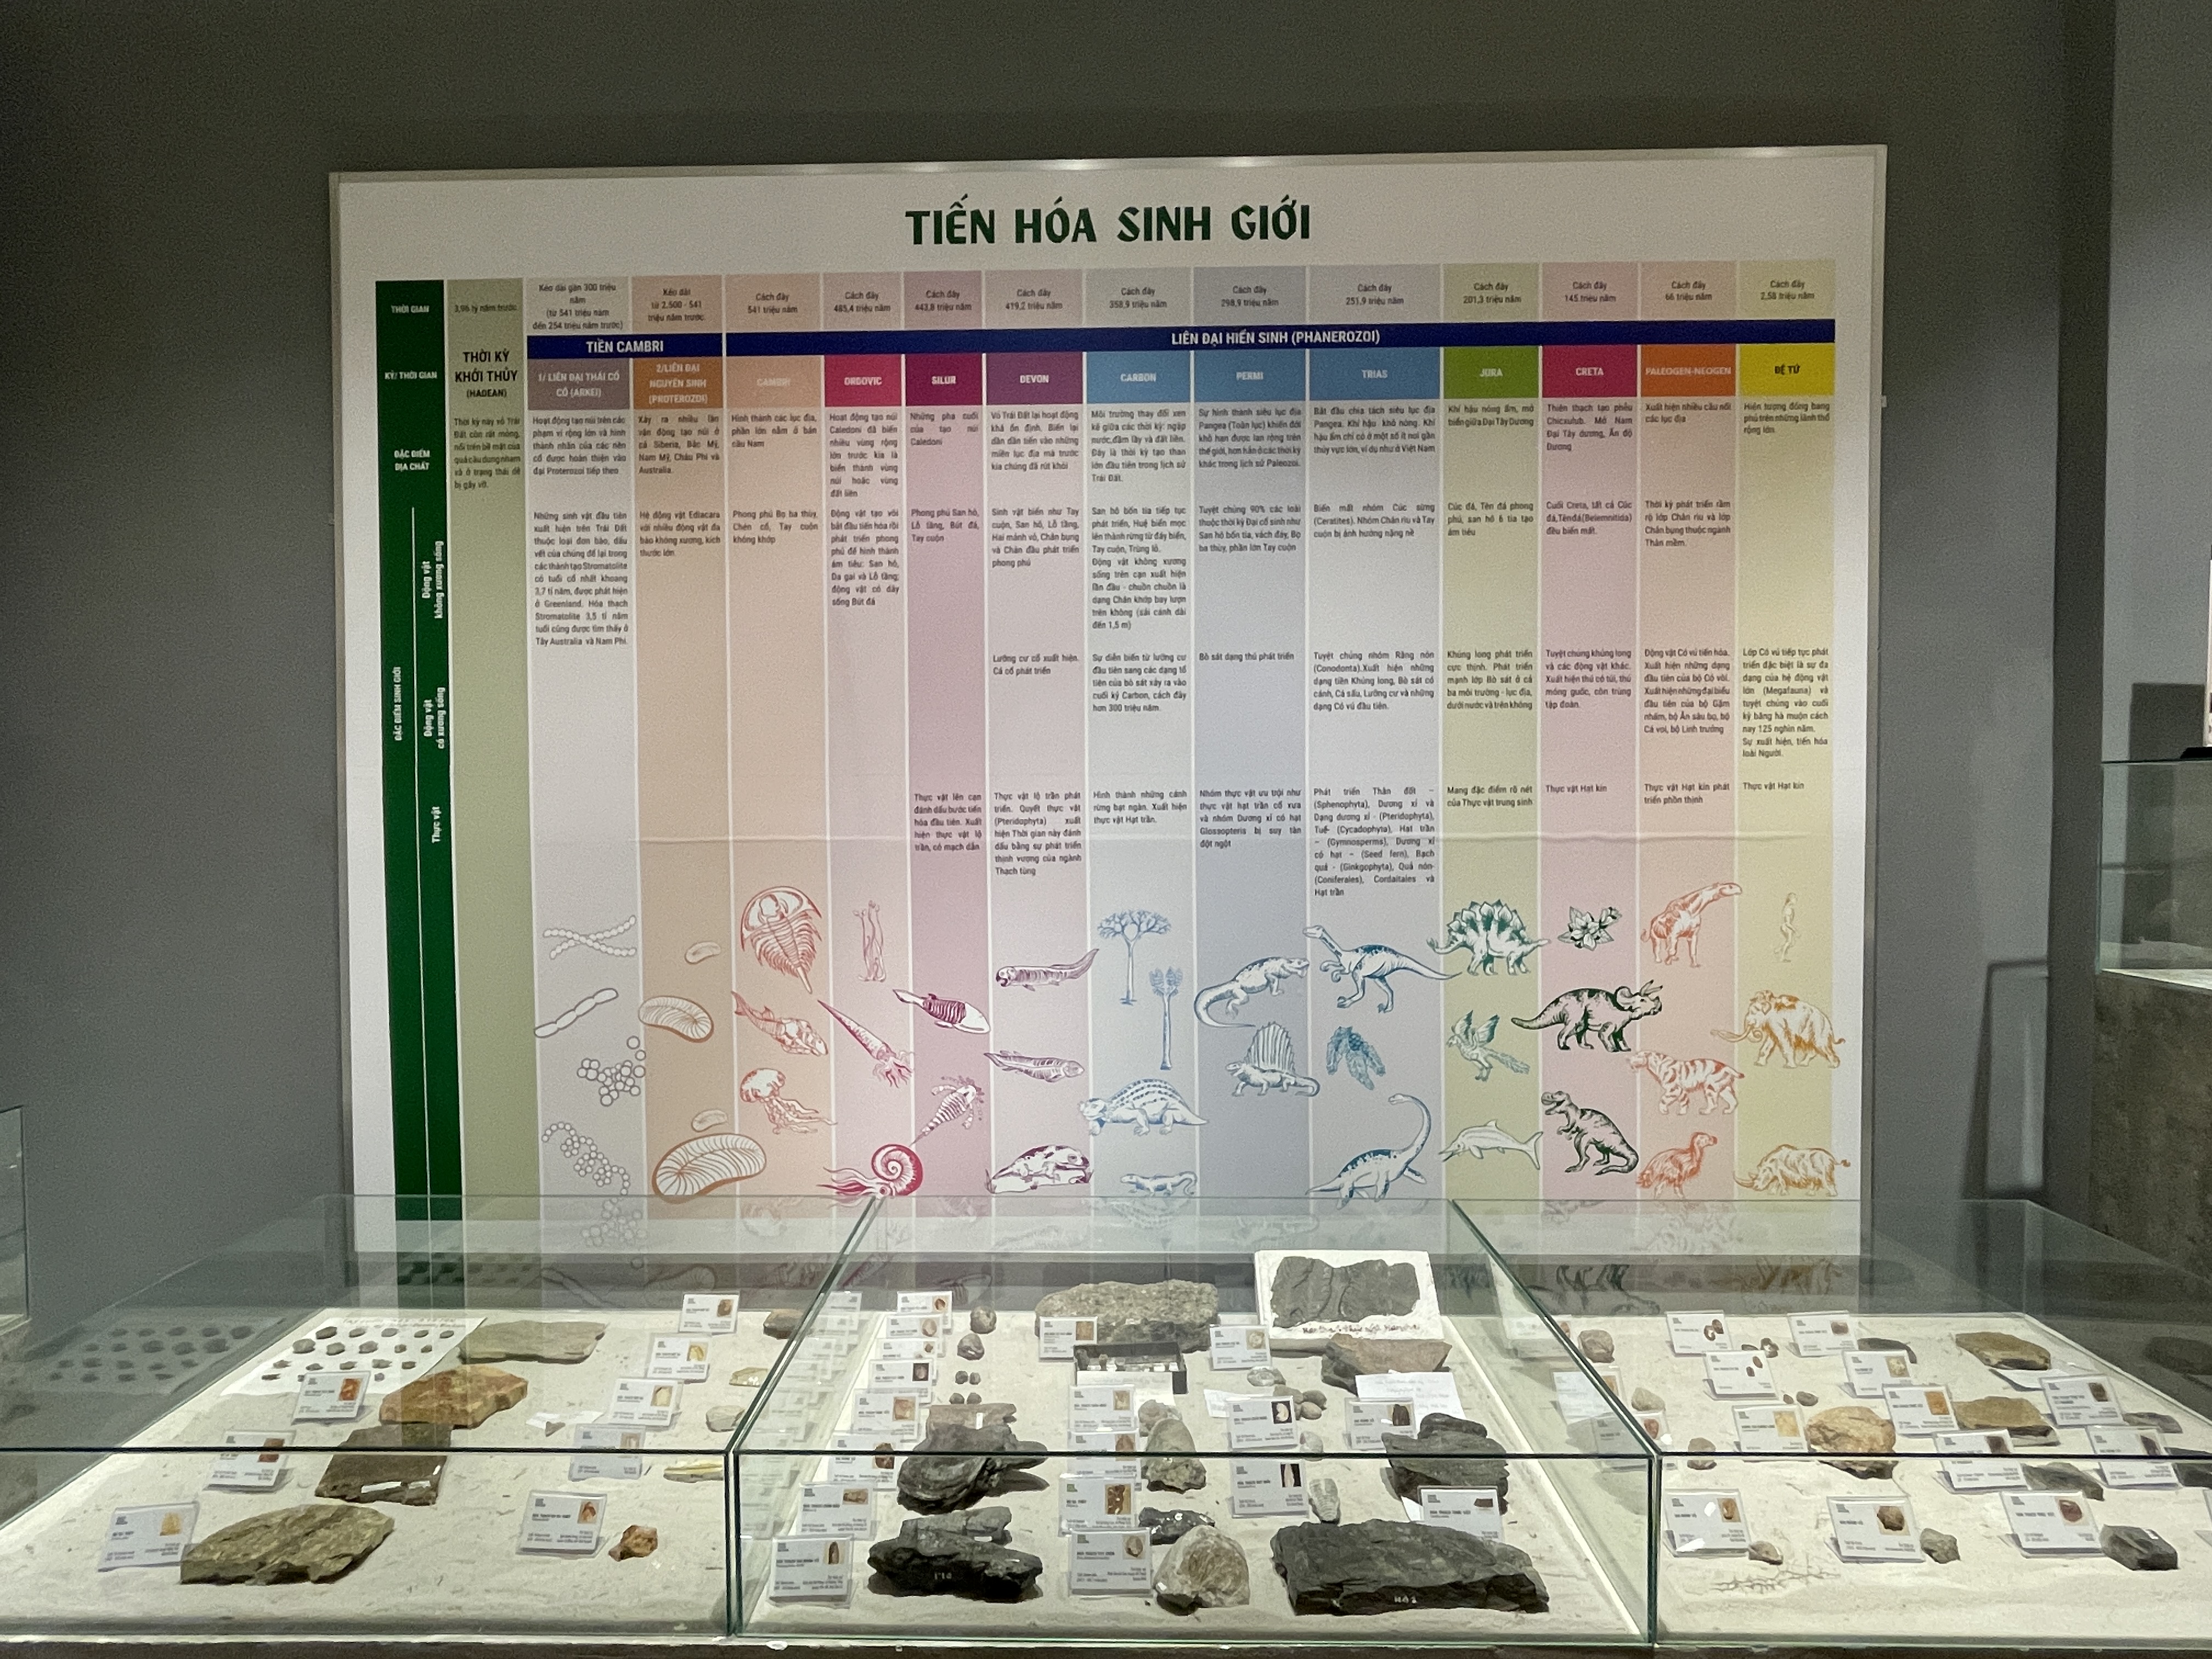 Information about biological evolution on Earth is on display at the exhibition. Photo: Dong Nguyen / Tuoi Tre News